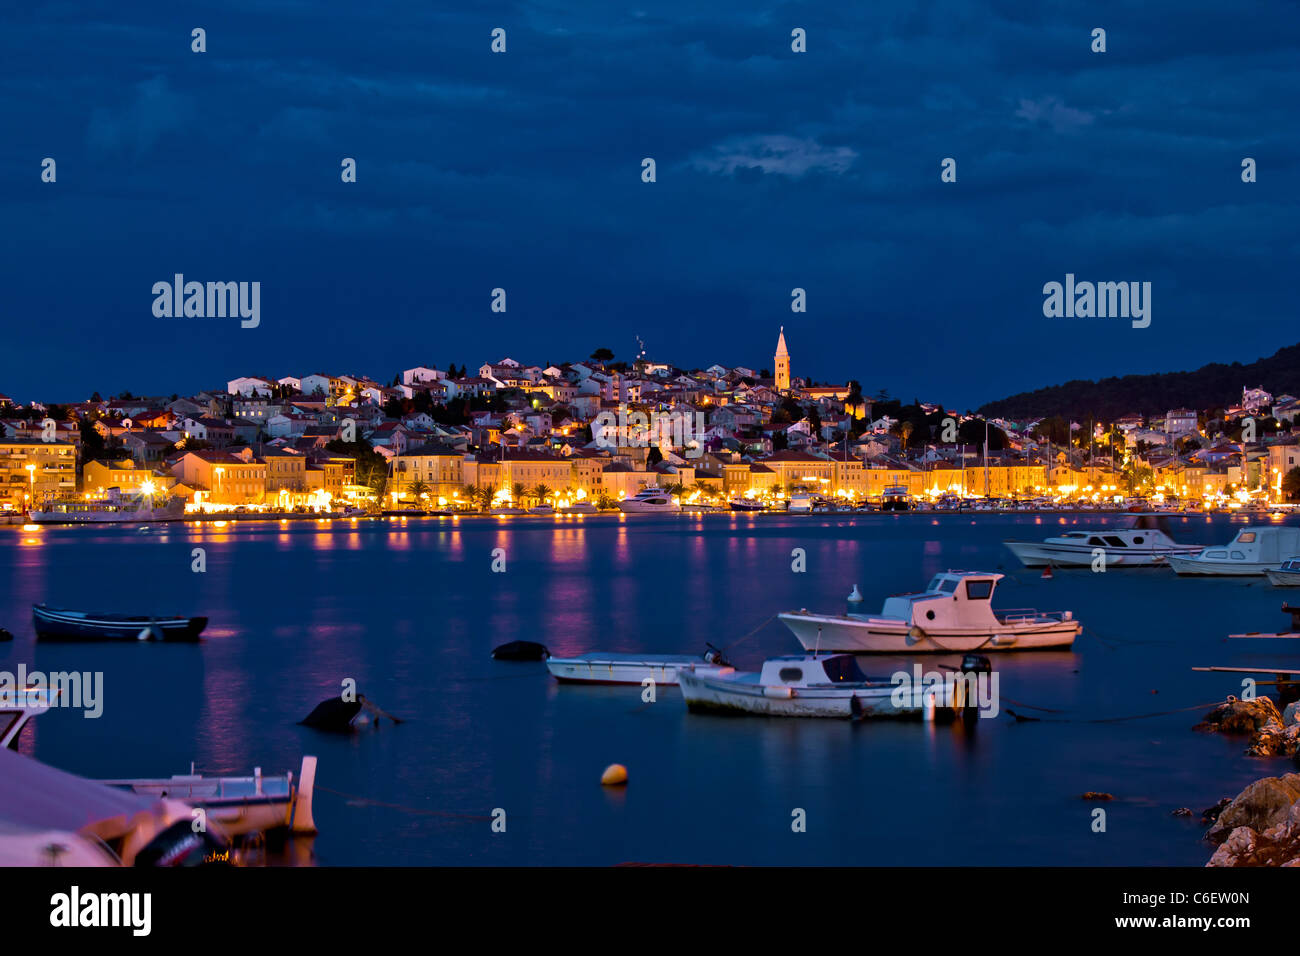 Mali Losinj, Croatie blue hour sunset panorama Banque D'Images